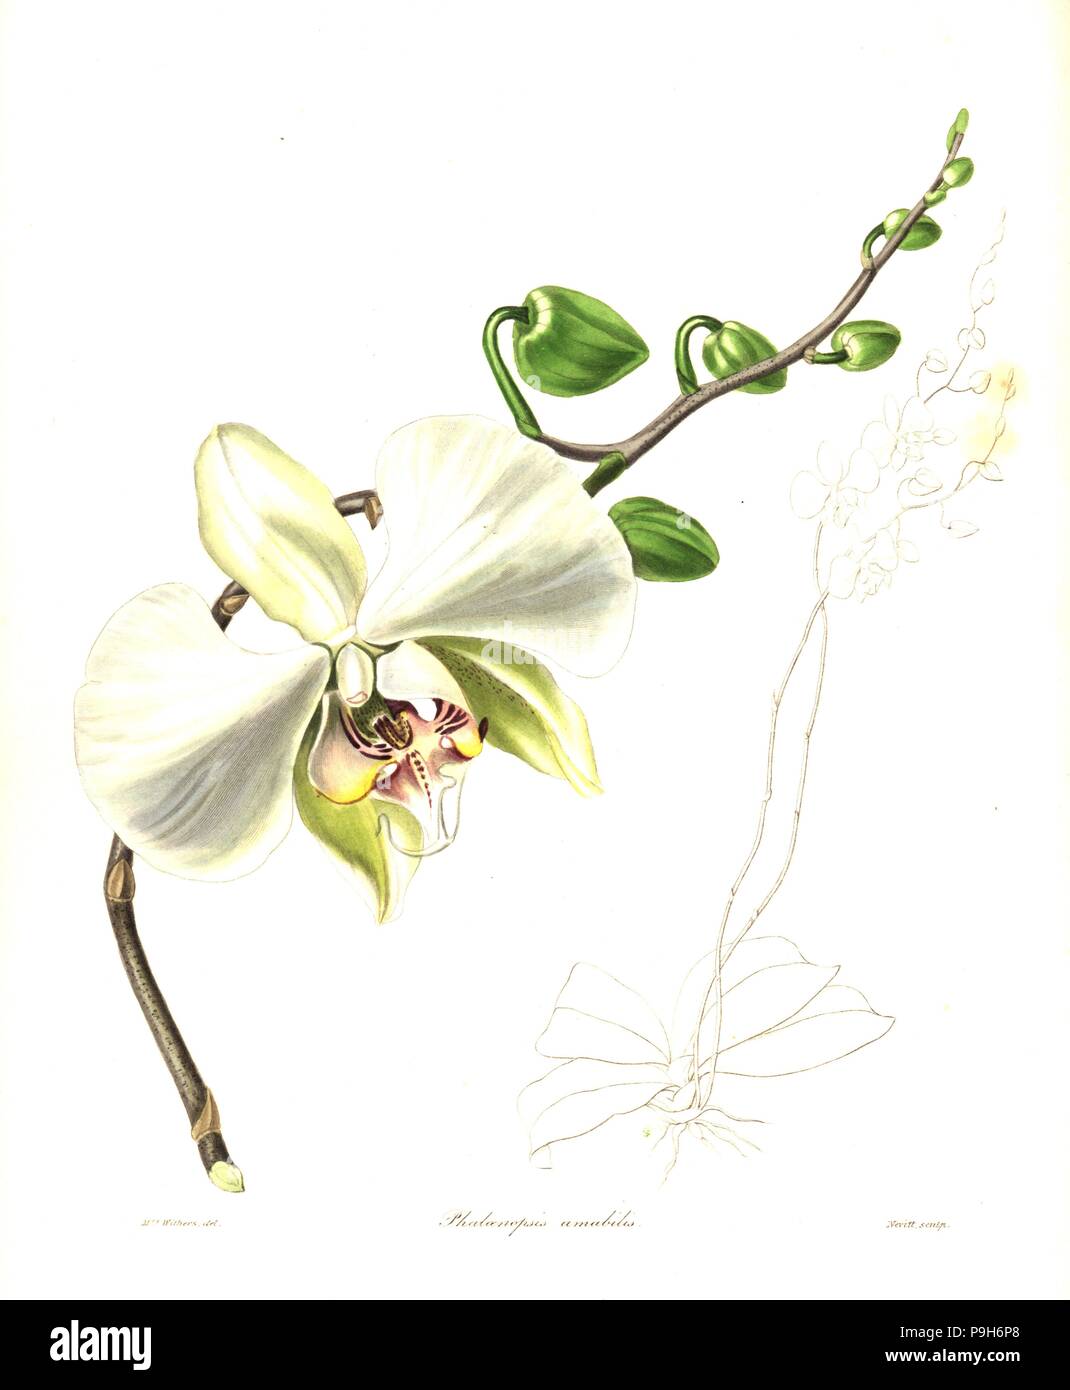 Moth orchid, Phalaenopsis amabilis. Handcoloured copperplate engraving by S. Nevitt after a botanical illustration by Mrs Augusta Withers from Benjamin Maund and the Rev. John Stevens Henslow's The Botanist, London, 1836. Stock Photo